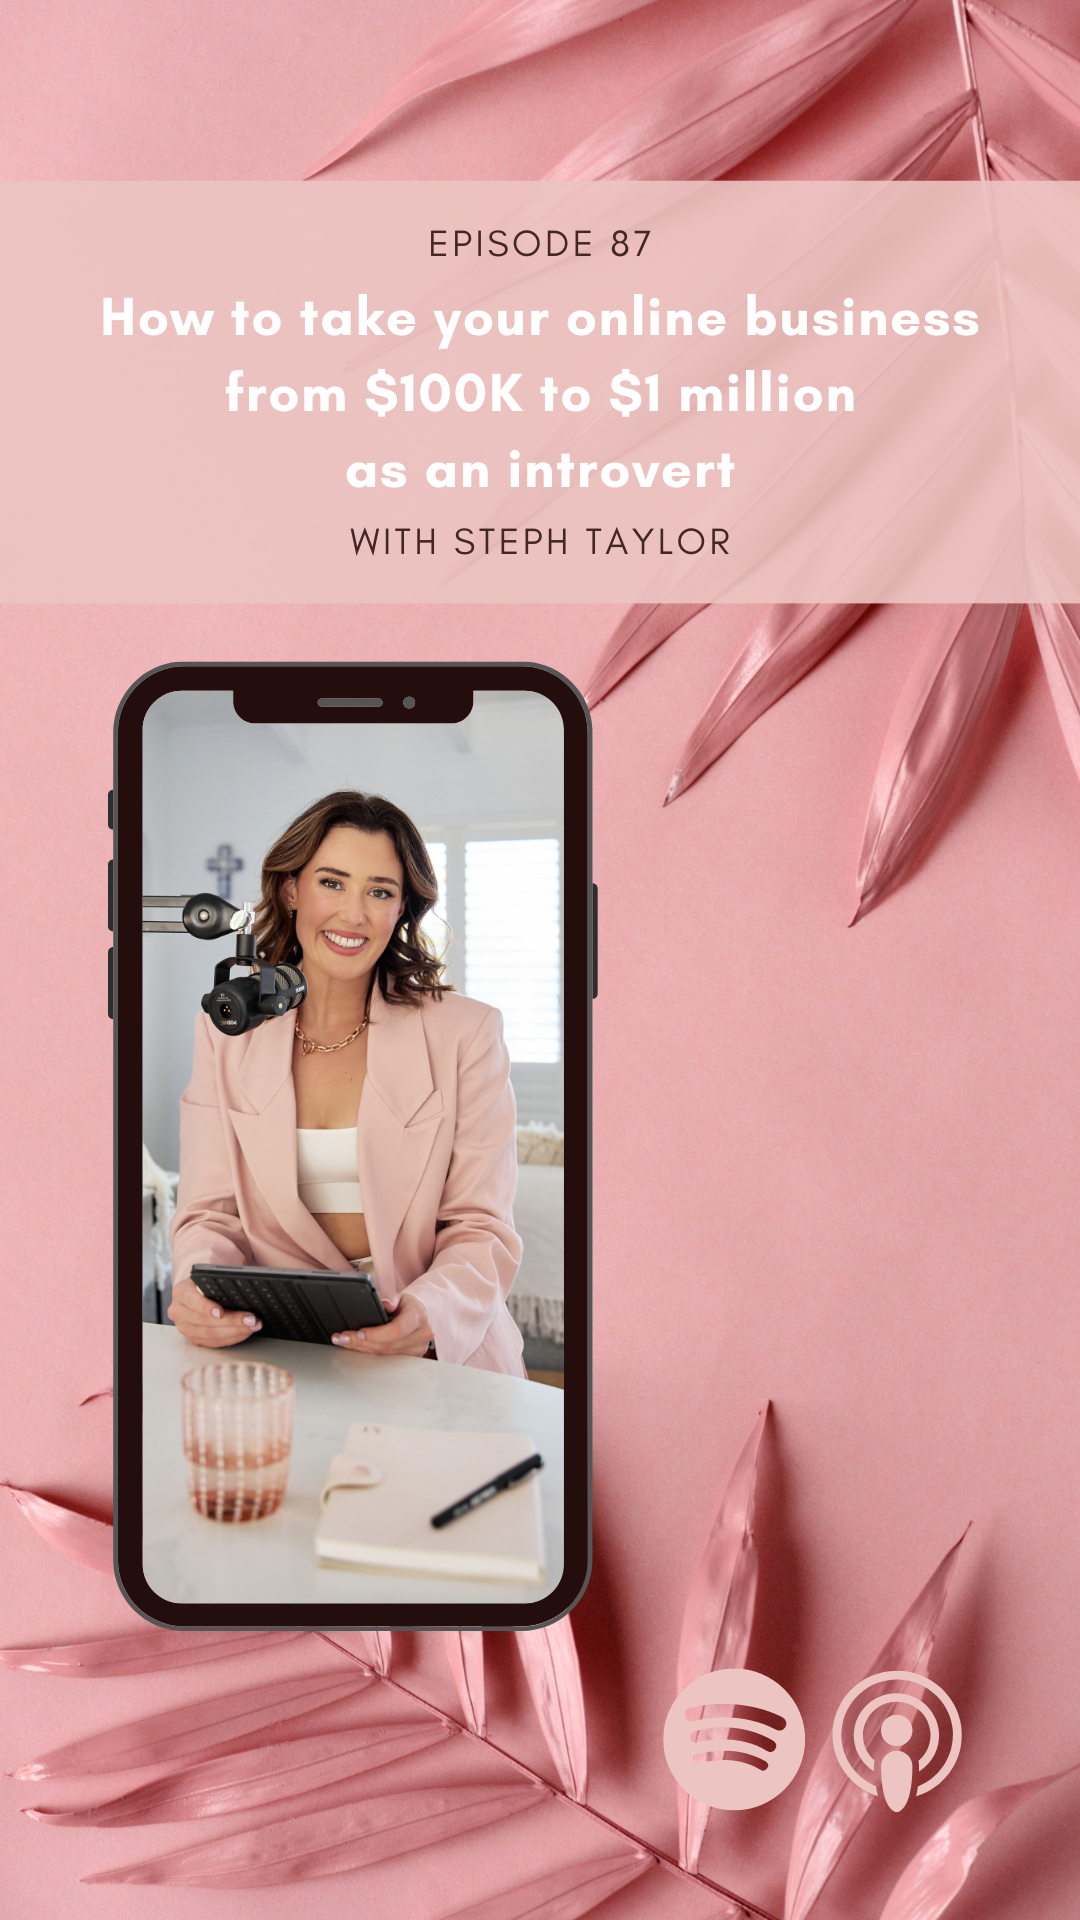 How to take your online business from $100K to $1 million as an introvert with Steph Taylor